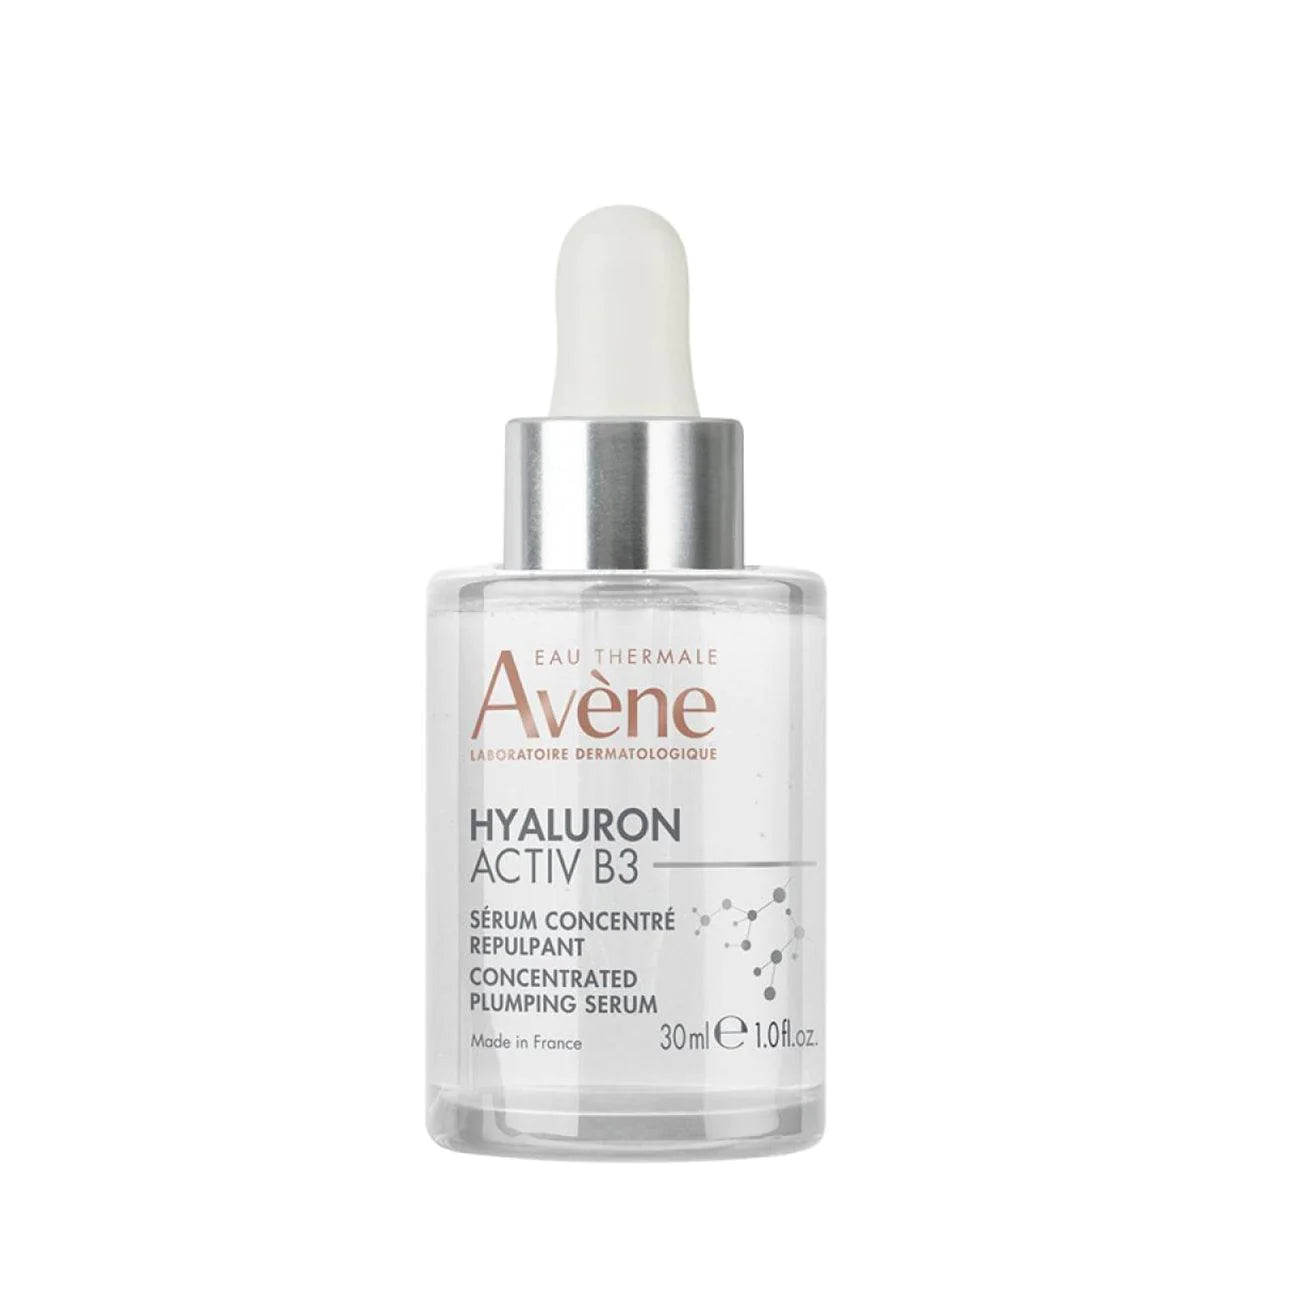 AVÈNE Hyaluron Activ B3 Concentrated Plumping Serum